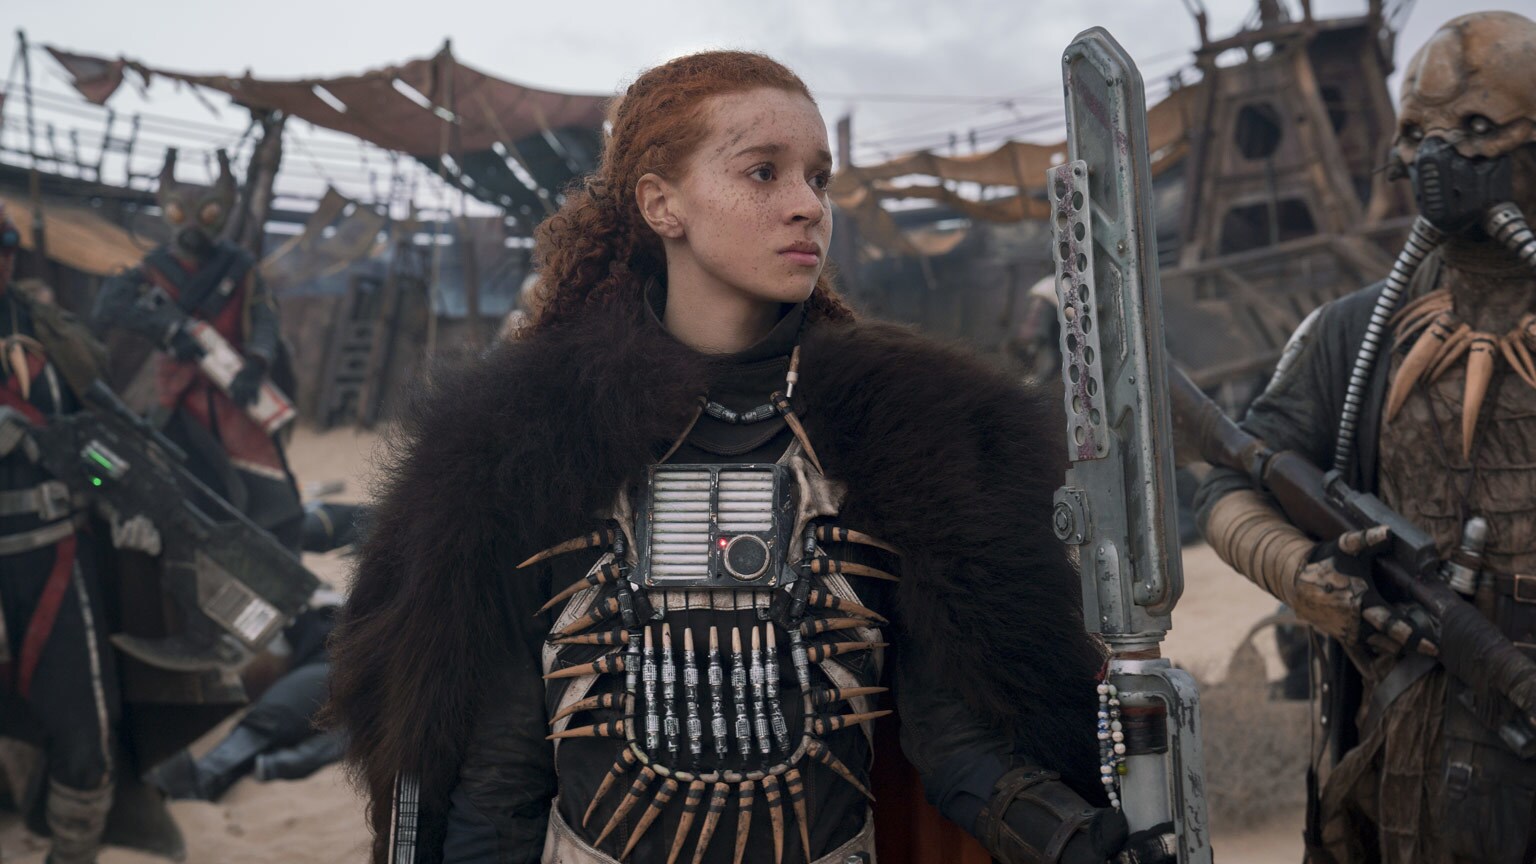 What is the role of Enfys Nest in Solo: A Star Wars Story?